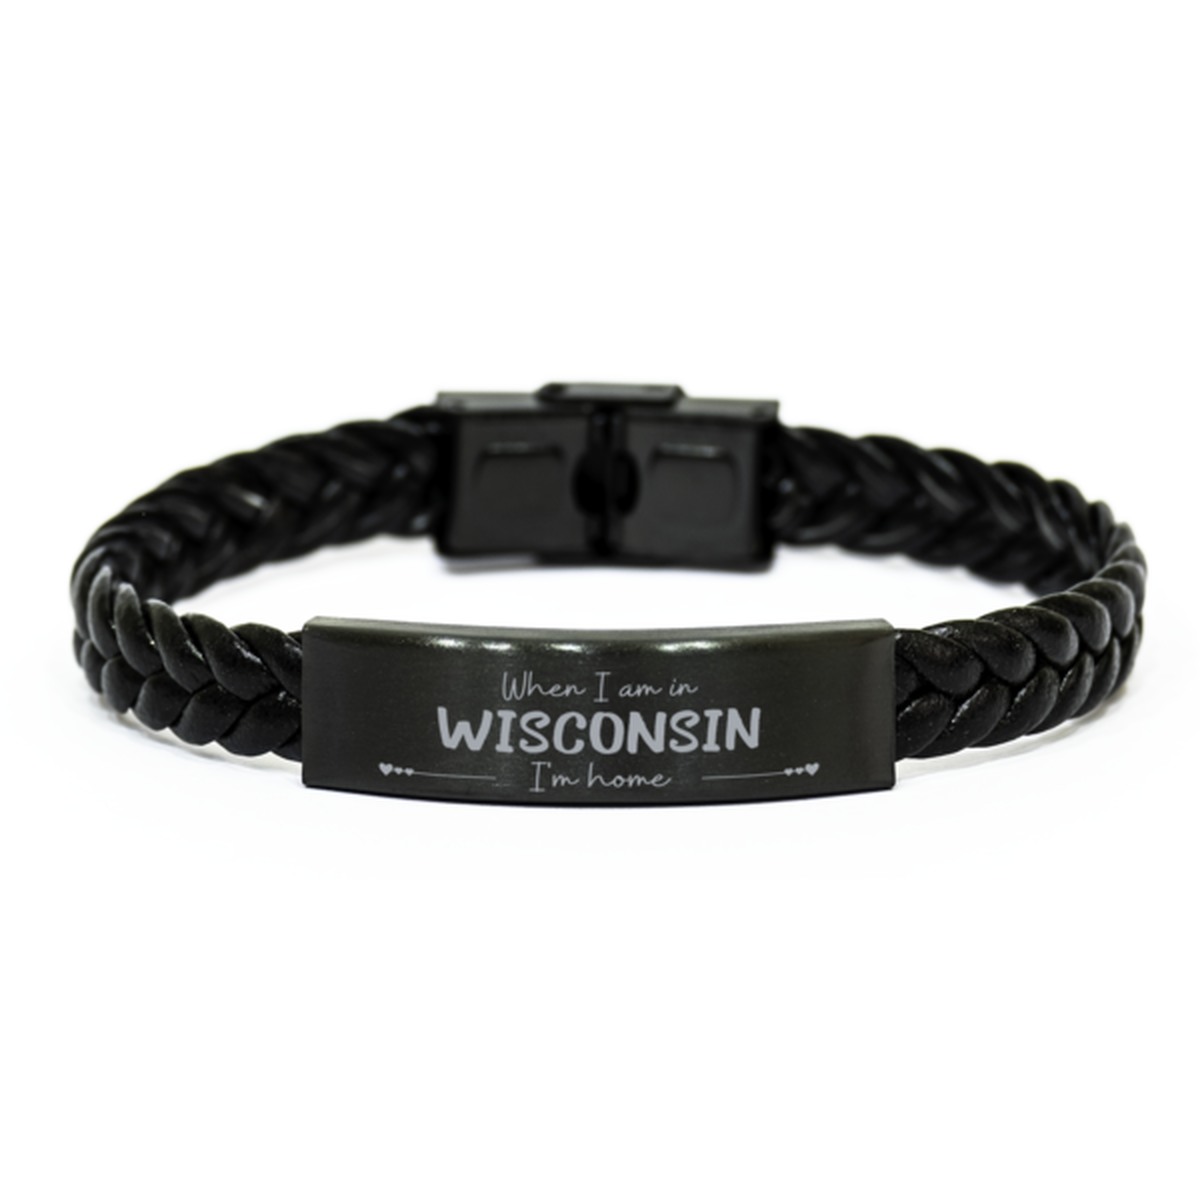 When I am in Wisconsin I'm home Braided Leather Bracelet, Cheap Gifts For Wisconsin, State Wisconsin Birthday Gifts for Friends Coworker